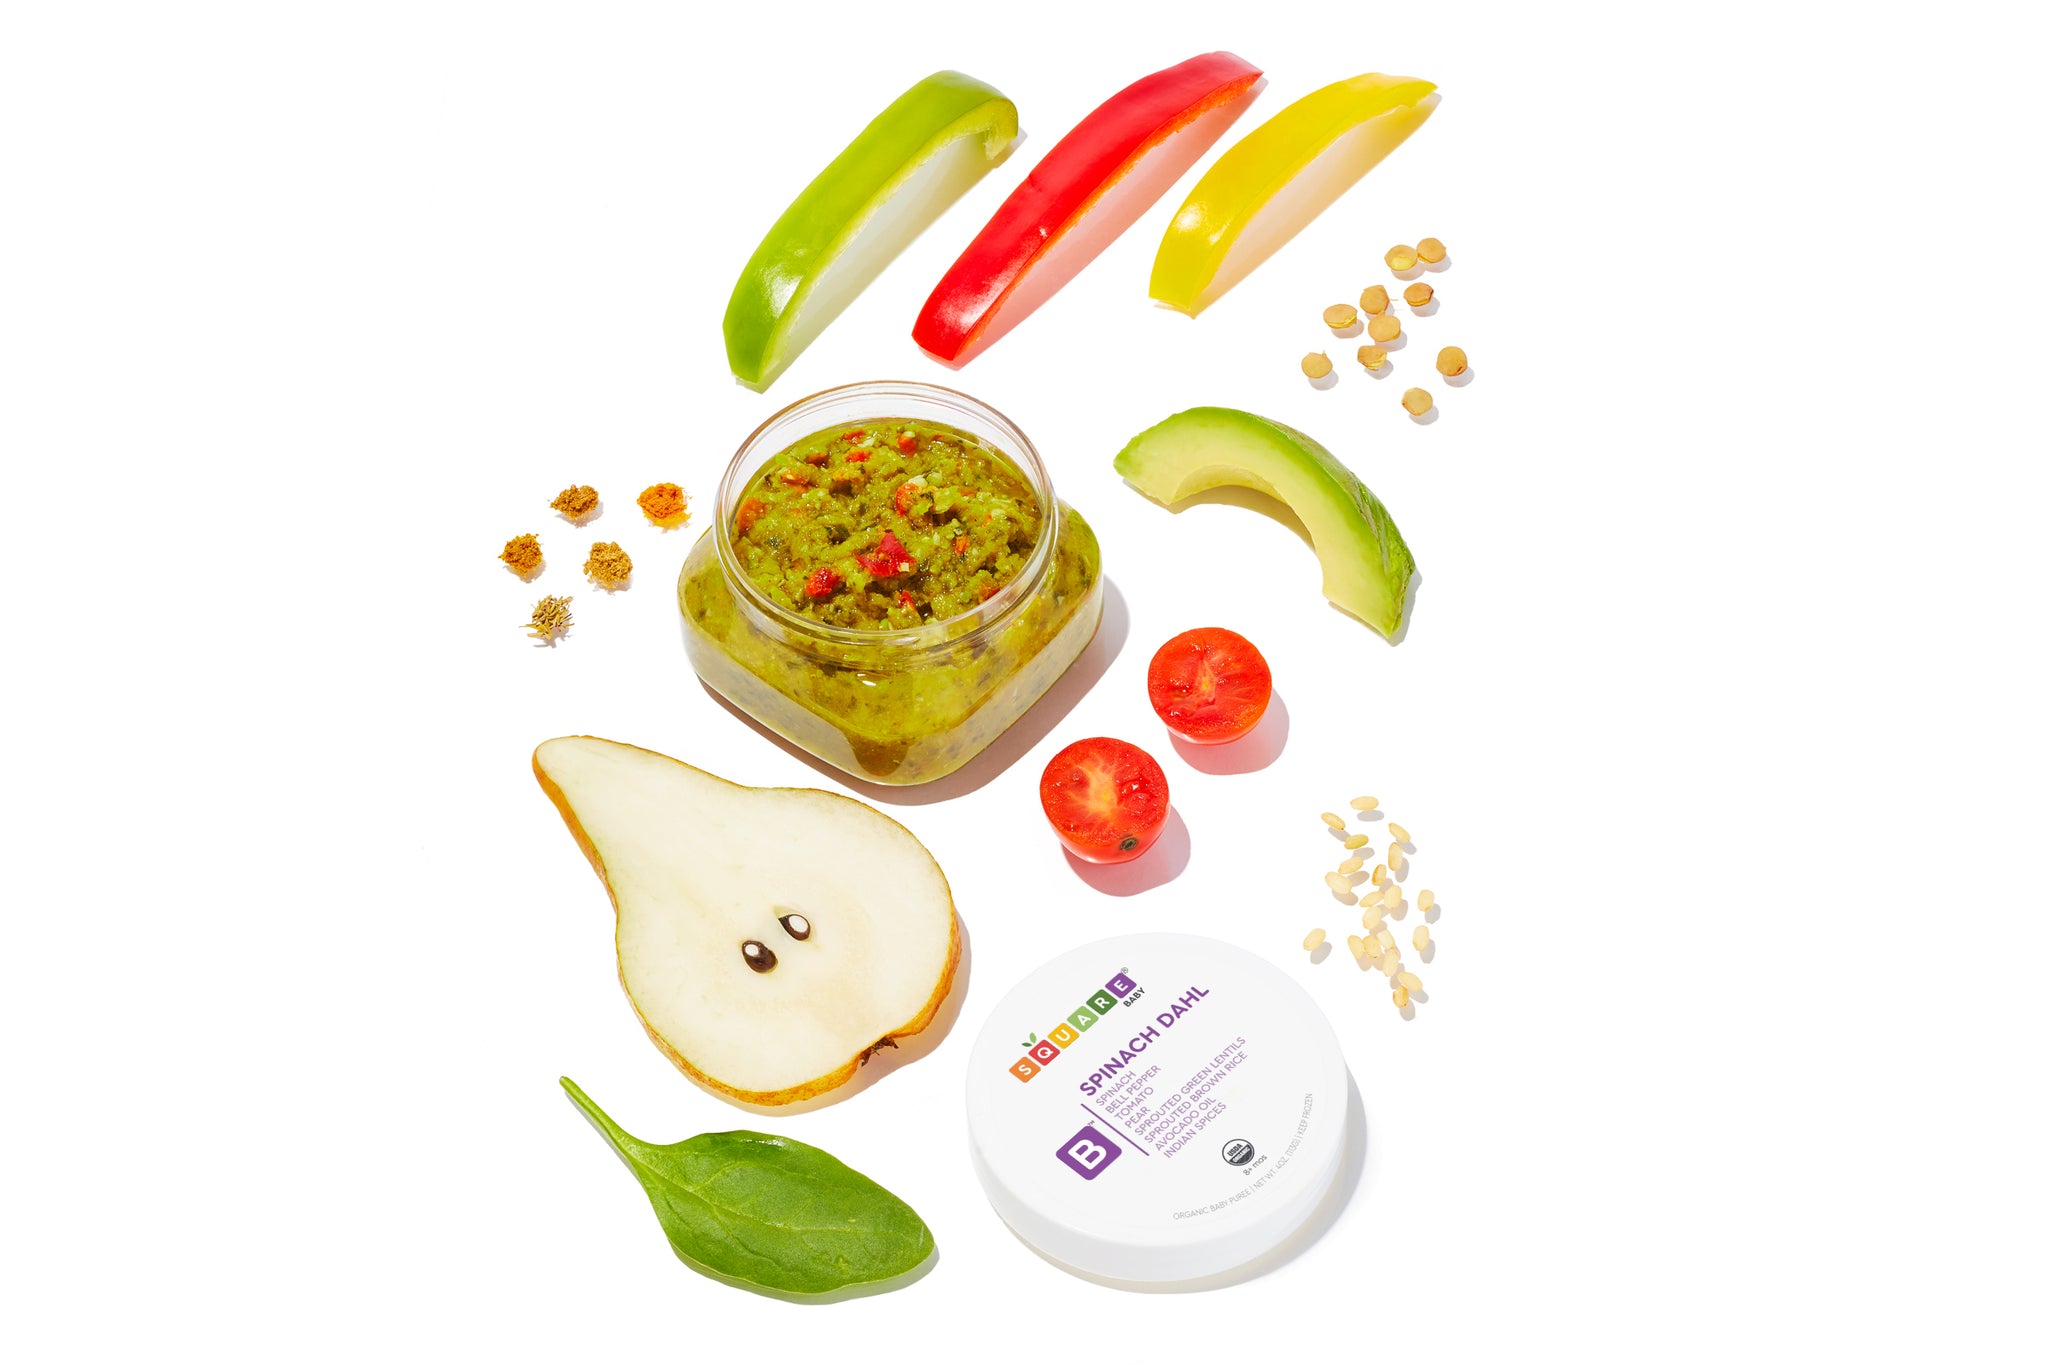 Baby Puree food - Spinach Dahl made with pear, apple, peppers, and more